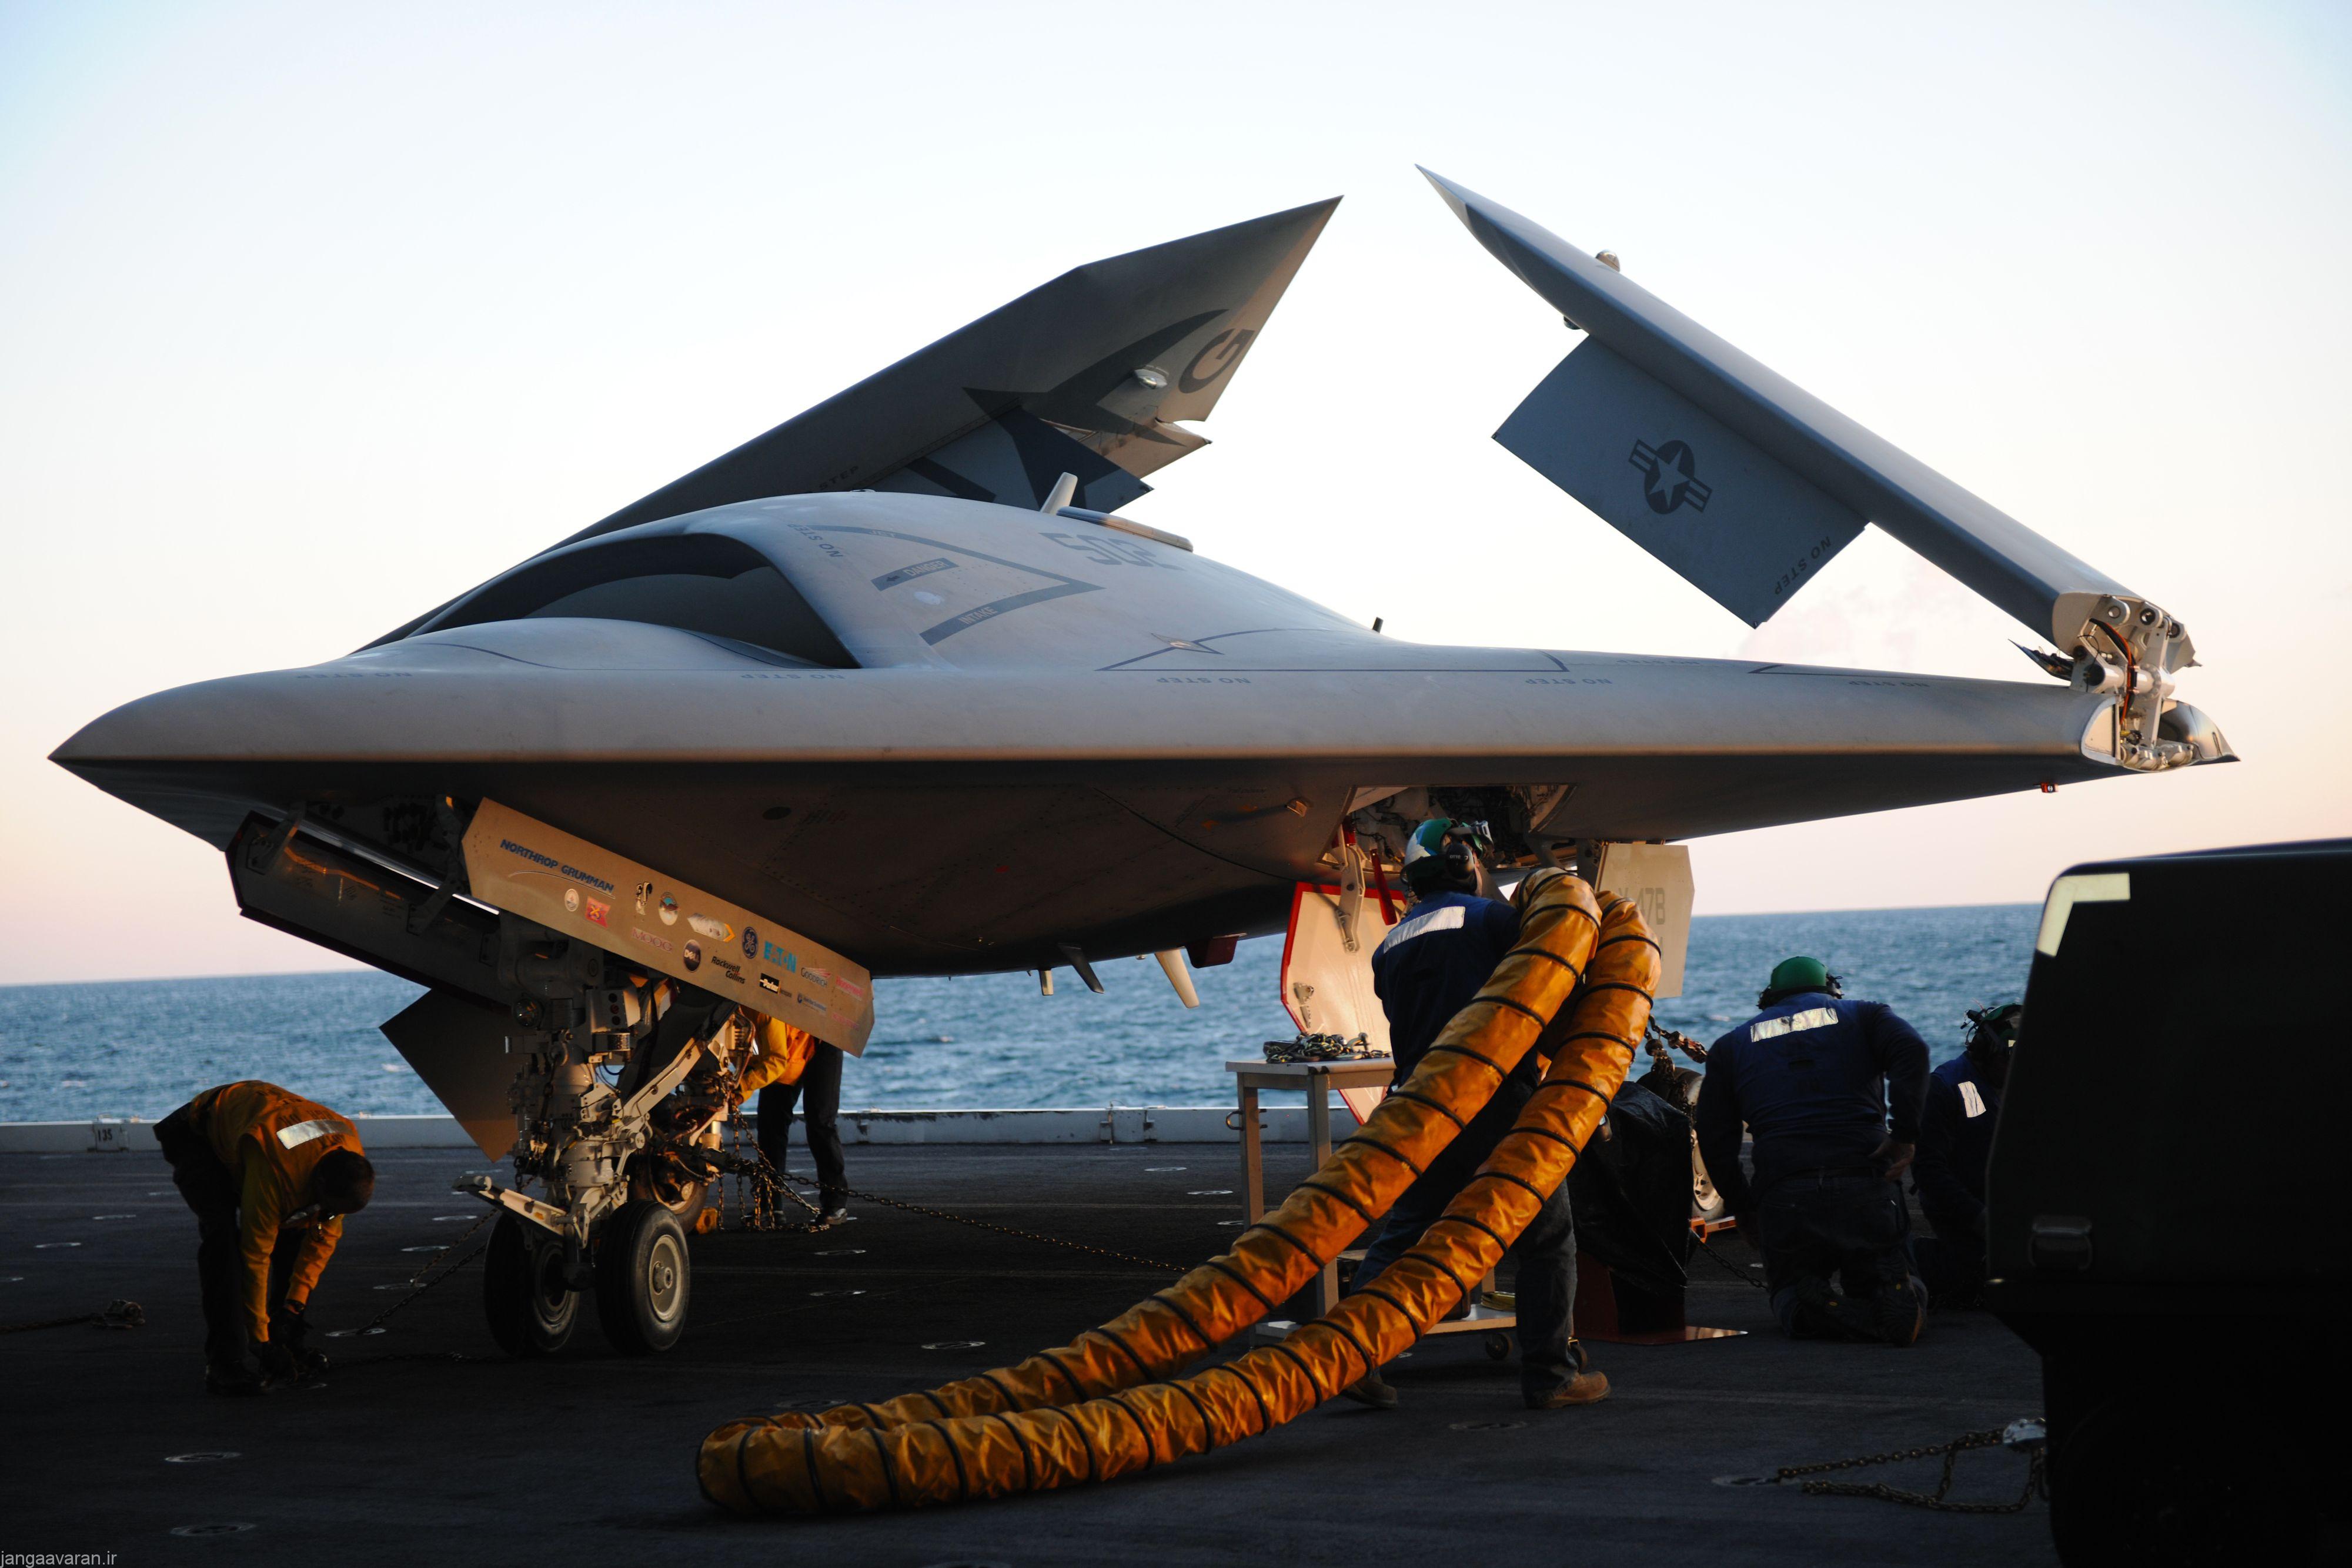 130514-N-CZ979-031 ATLANTIC OCEAN (May 14, 2013) An X-47B Unmanned Combat Air System (UCAS) demonstrator is loaded onto an aircraft elevator aboard the aircraft carrier USS George H.W. Bush (CVN 77). George H.W. Bush is scheduled to be the first aircraft carrier to catapult launch an unmanned aircraft from its flight deck. (U.S. Navy photo by Mass Communication Specialist Seaman Joshua Card/Released)